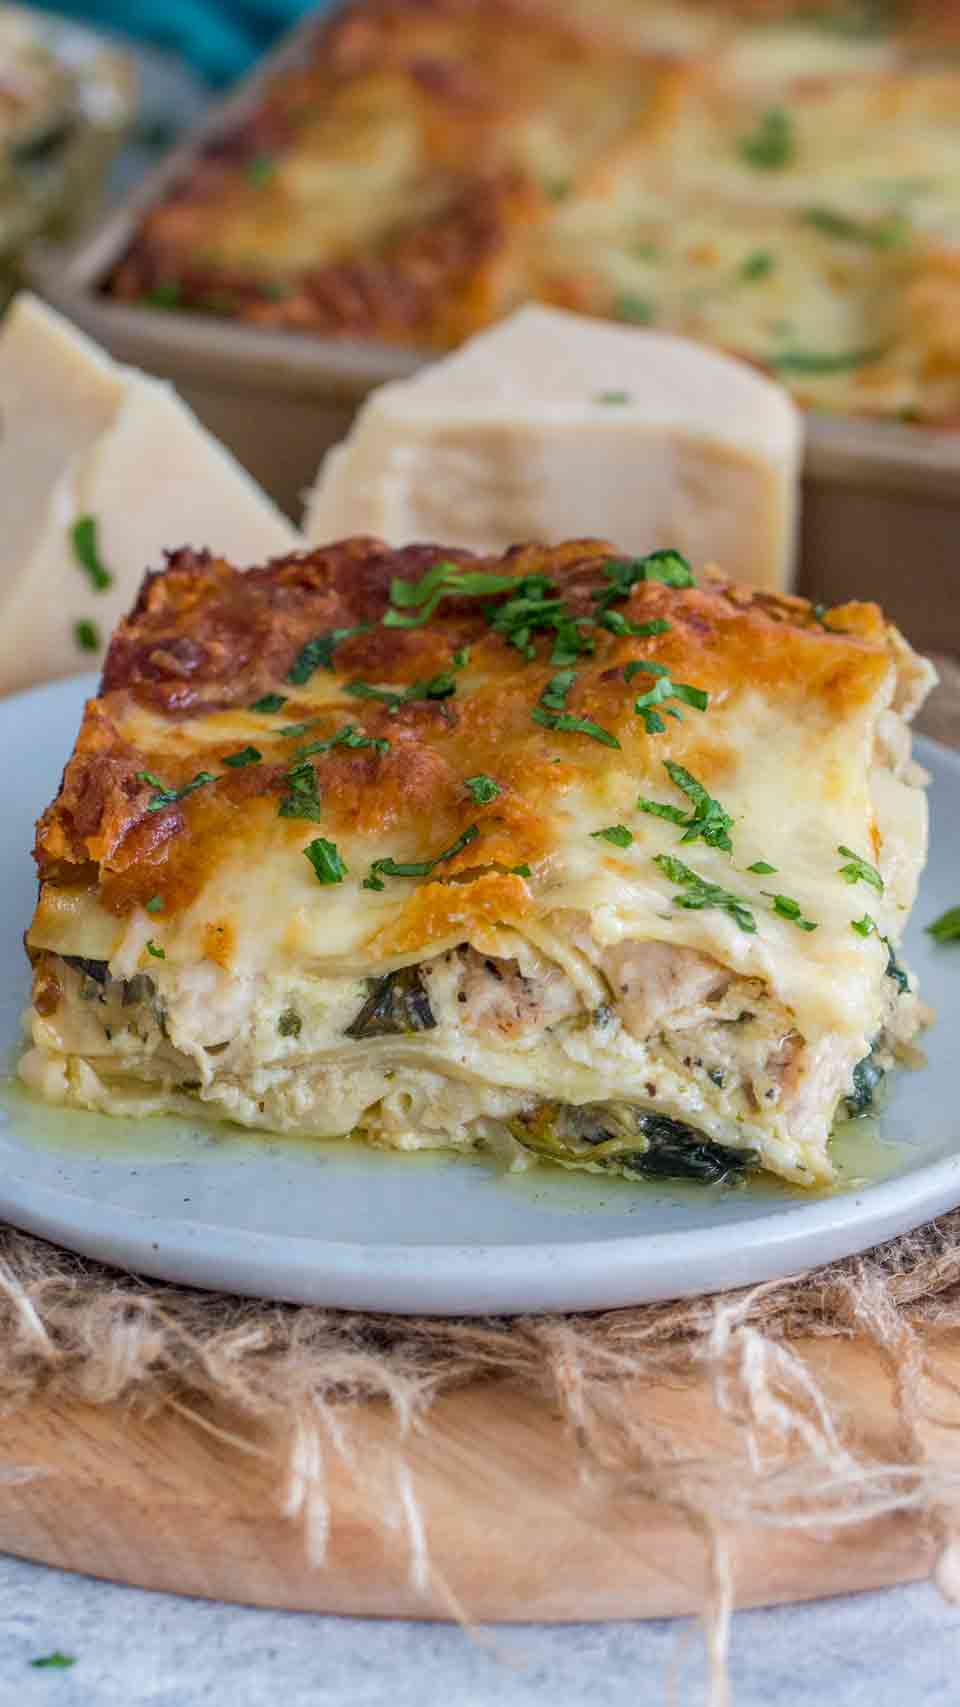 Chicken alfredo lasagna on a blue plate garnished with parsley